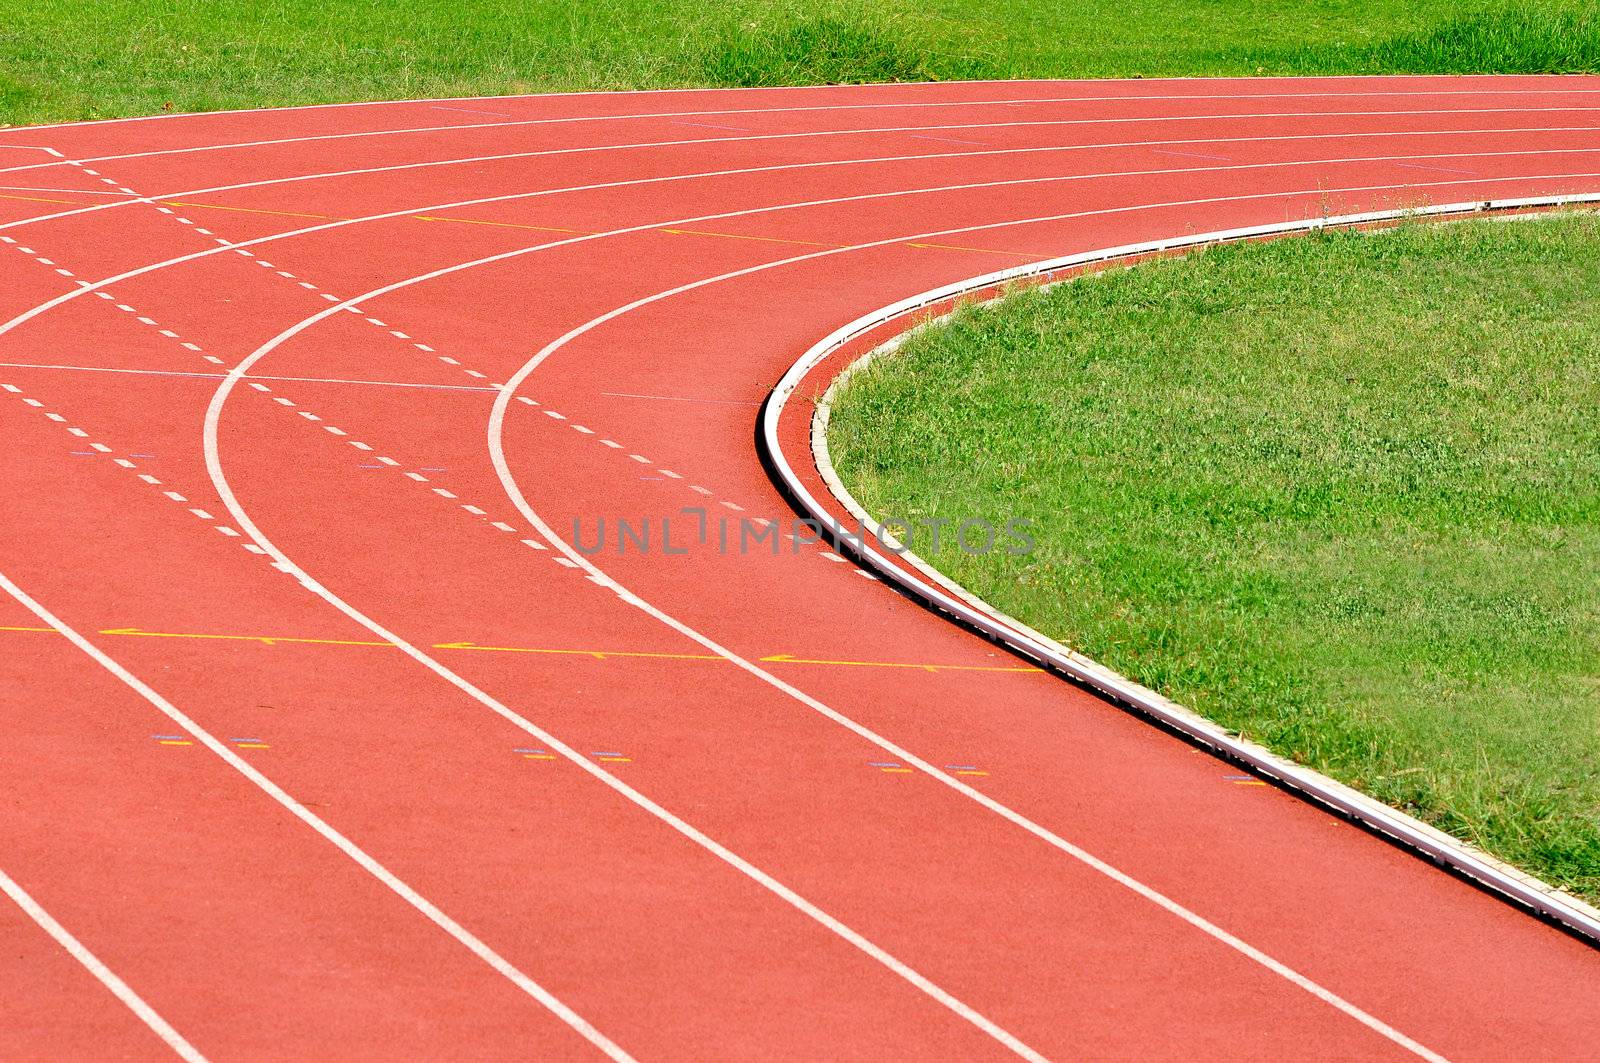 Details of an athletics running track, turning right